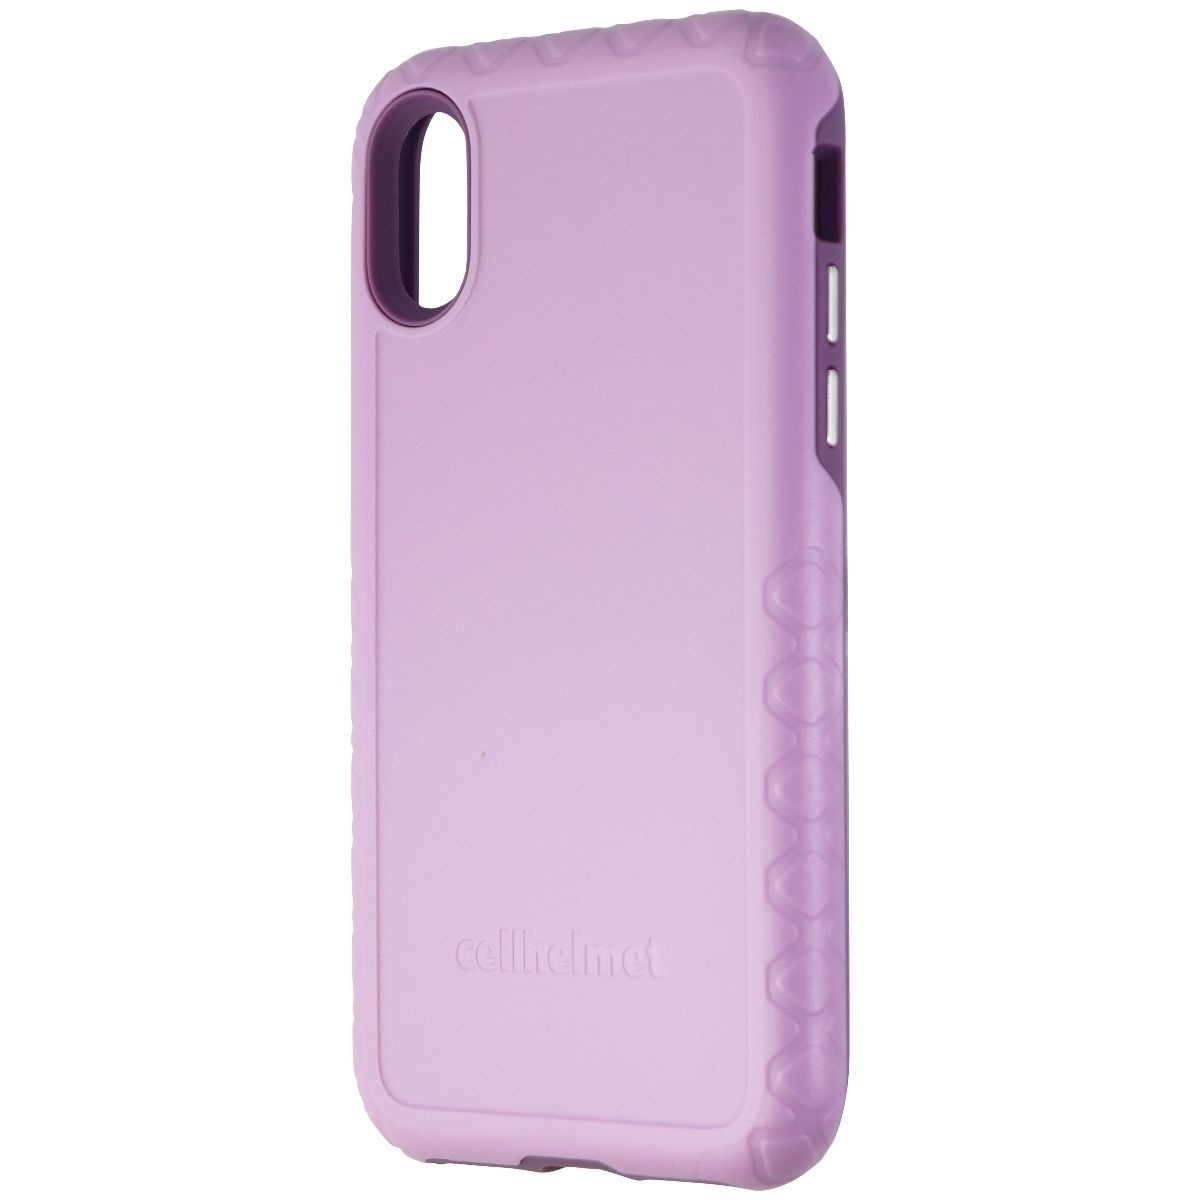 CellHelmet Fortitude Series Case For IPhone X & IPhone XS - Lilac Blossom Purple